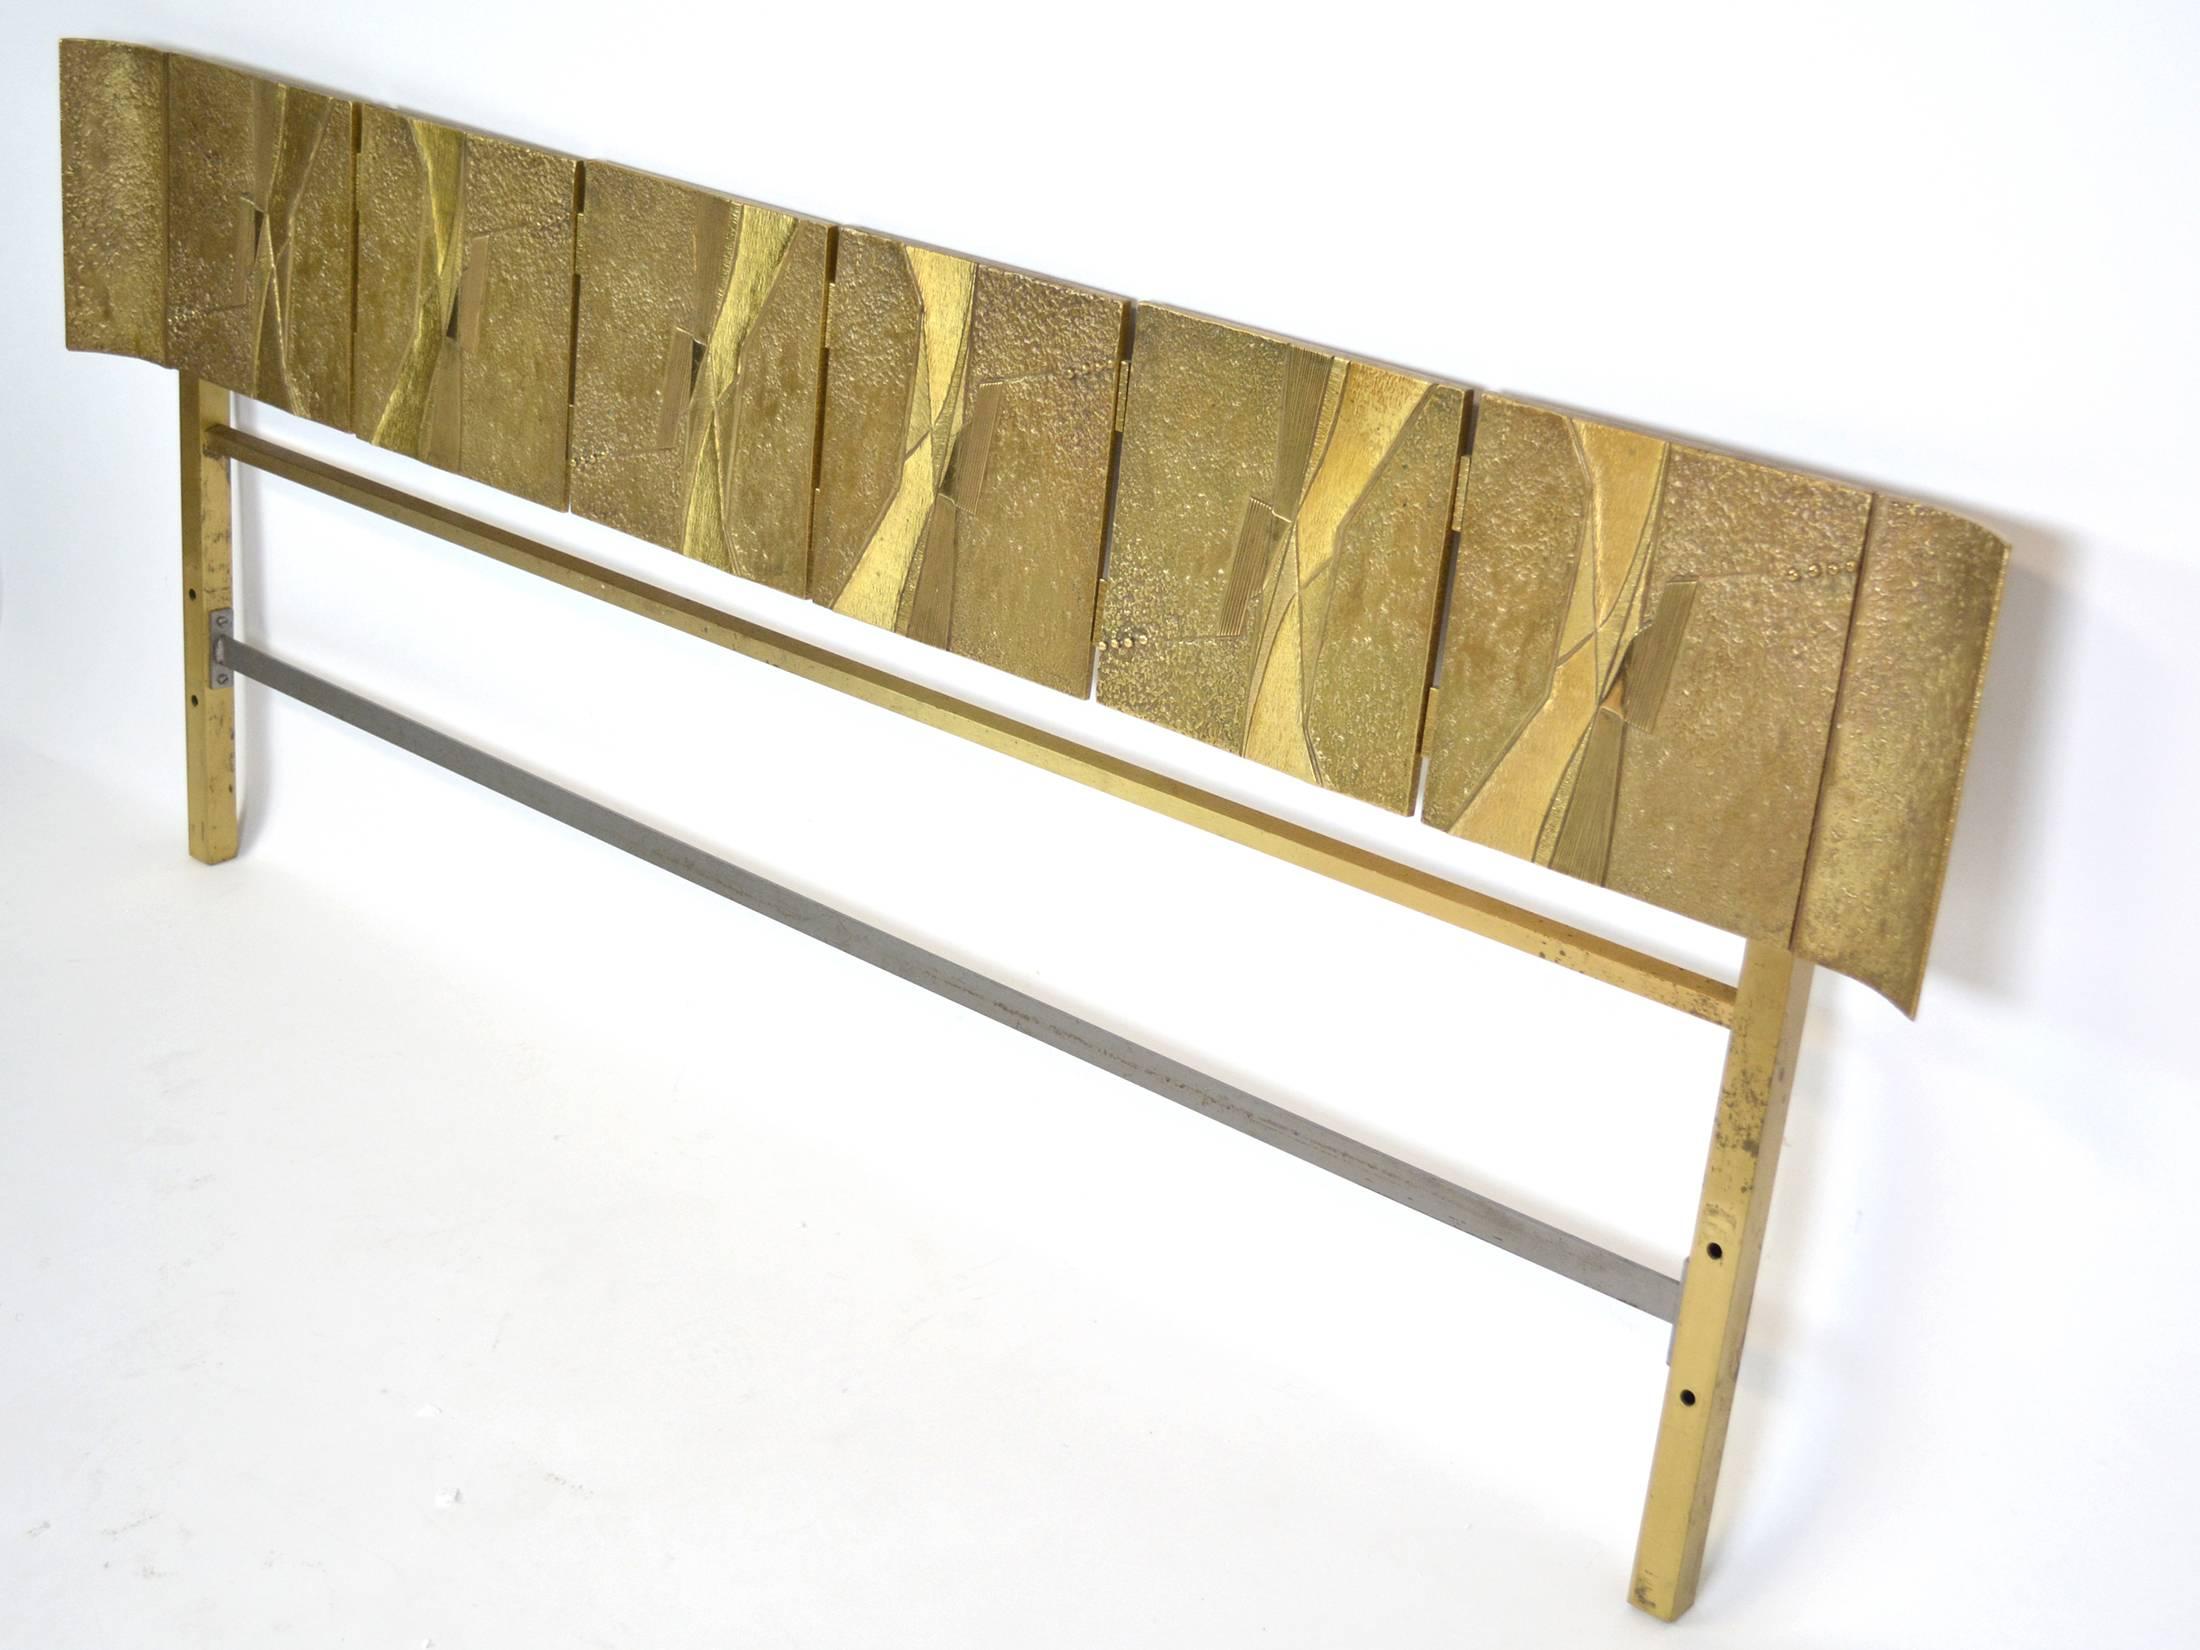 A bronze headboard by Luciano Frigerio, Italian, circa 1960, composed of six cast bronze panels flanked by curved panels on each end.